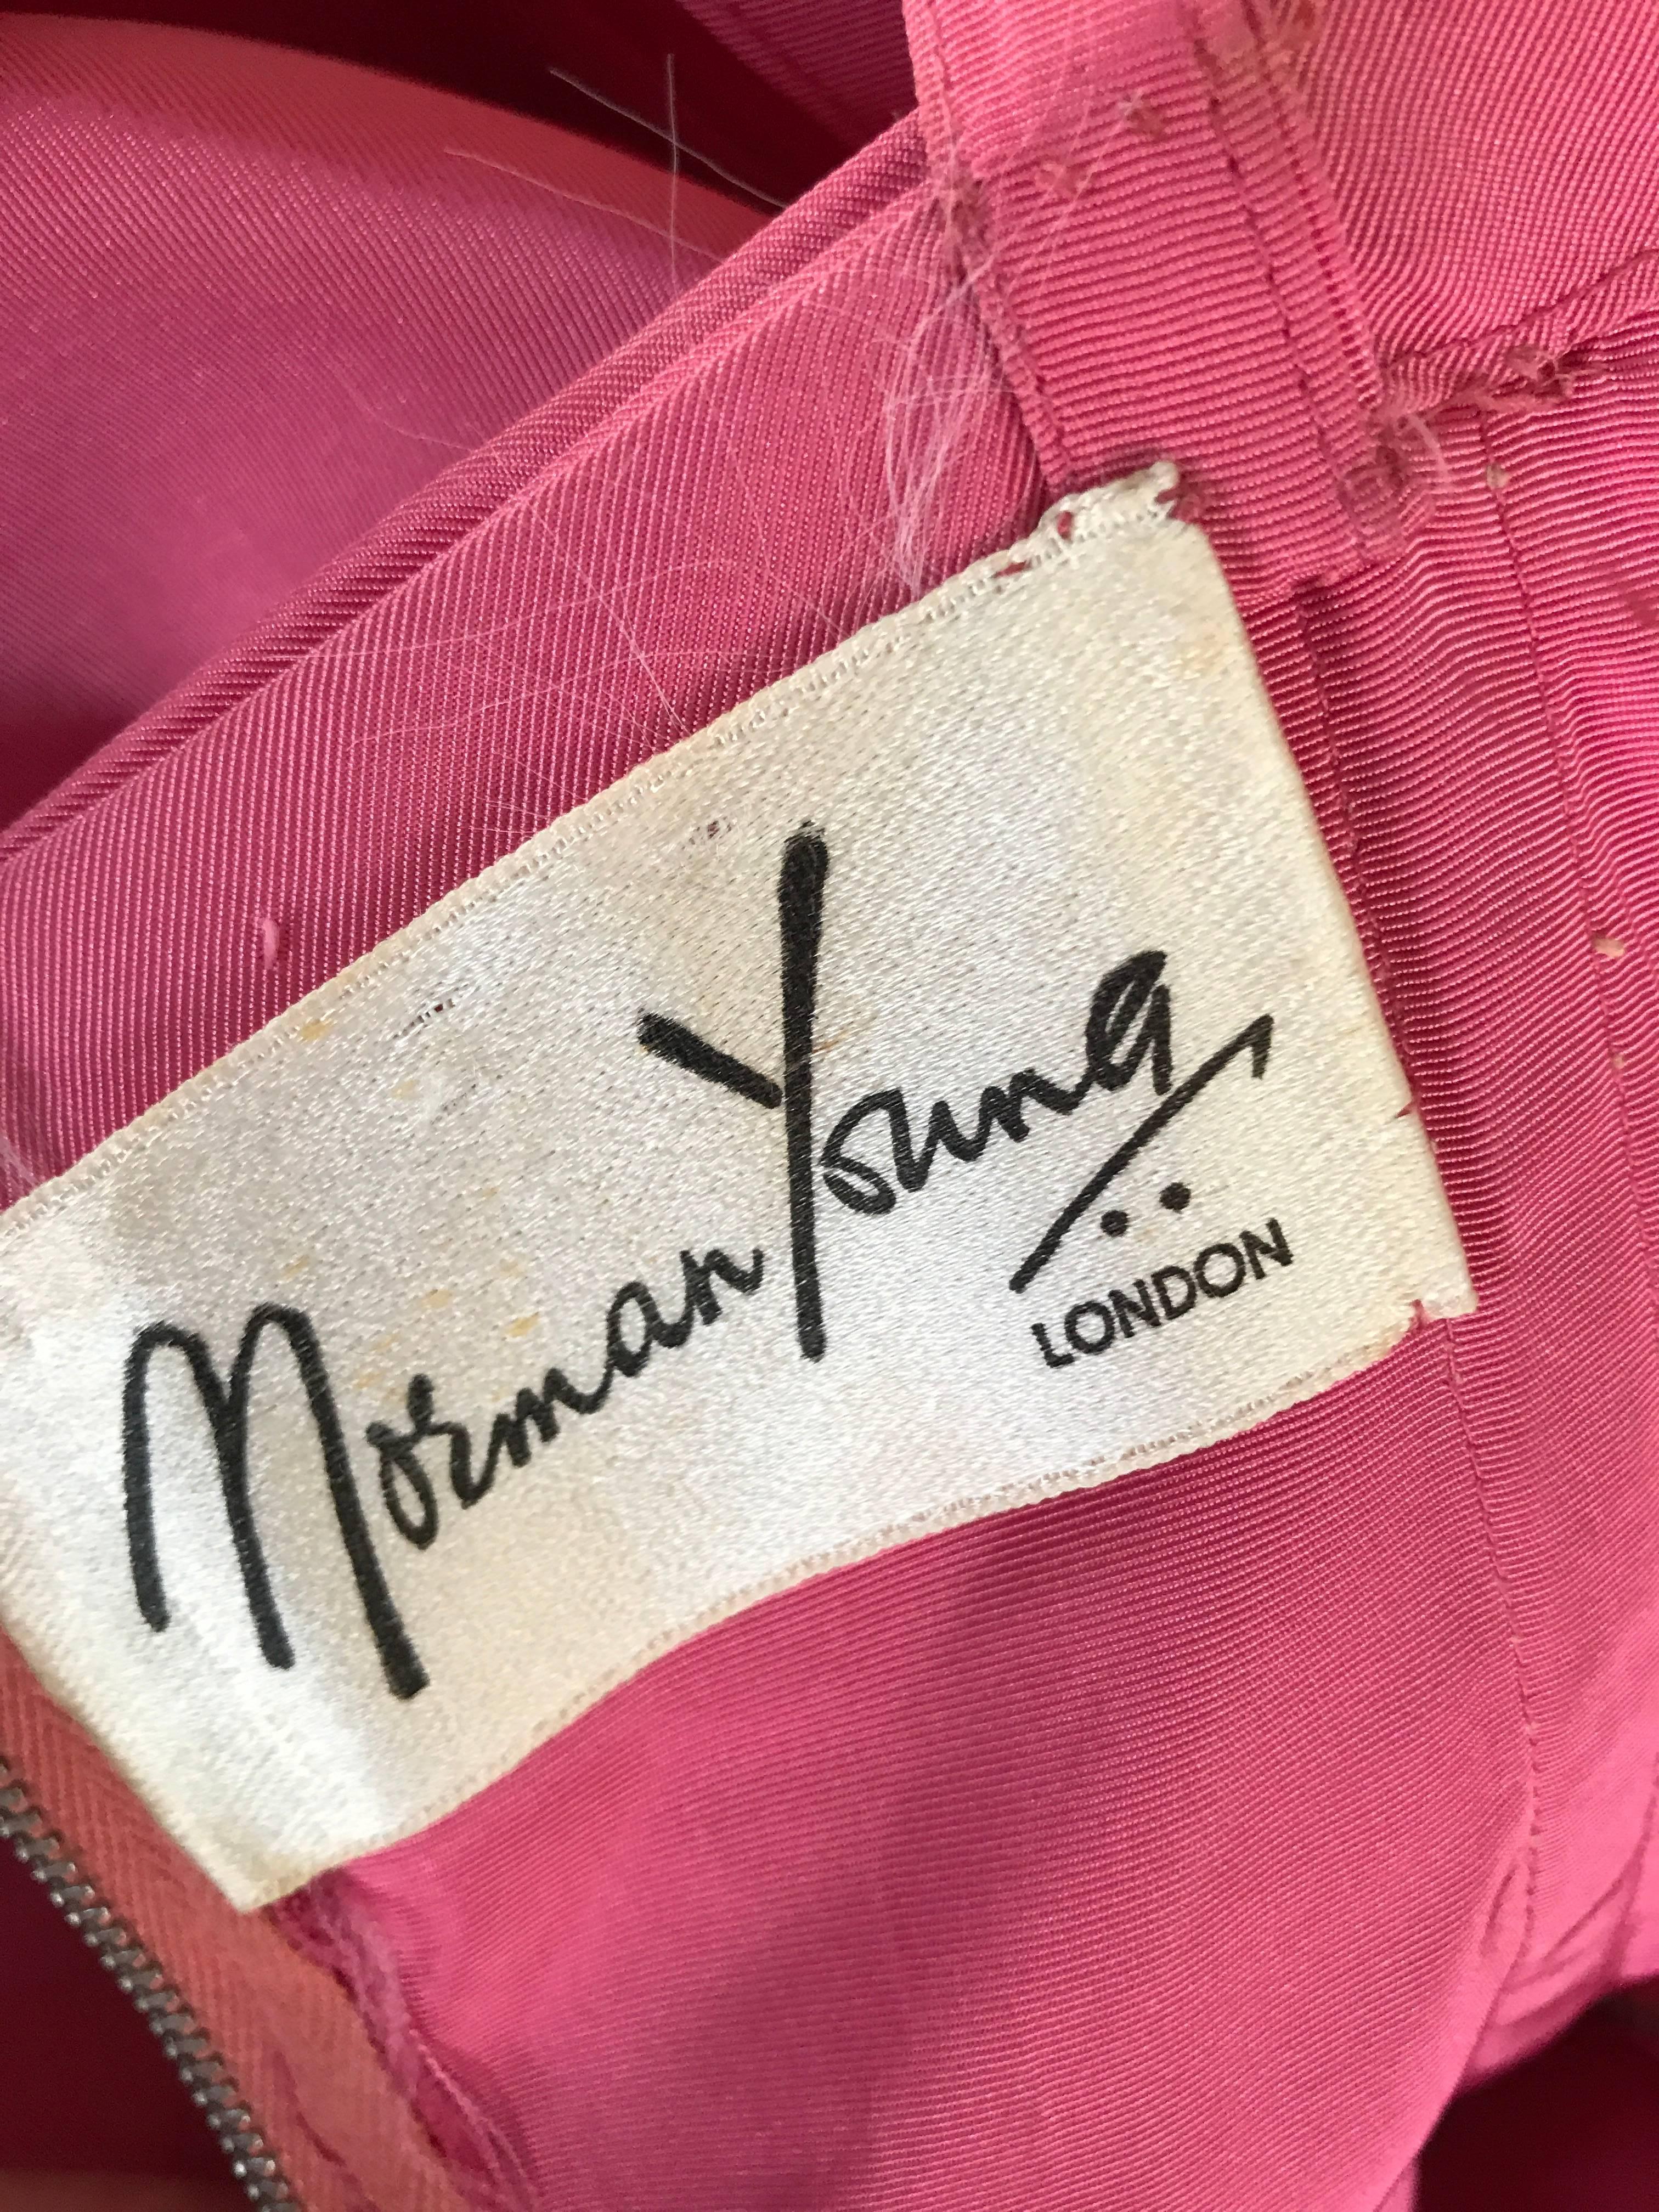 Original Vintage Mid Century Norman Young Evening Cocktail Dress Pink Taffeta  In Excellent Condition For Sale In Portsmouth, Hampshire